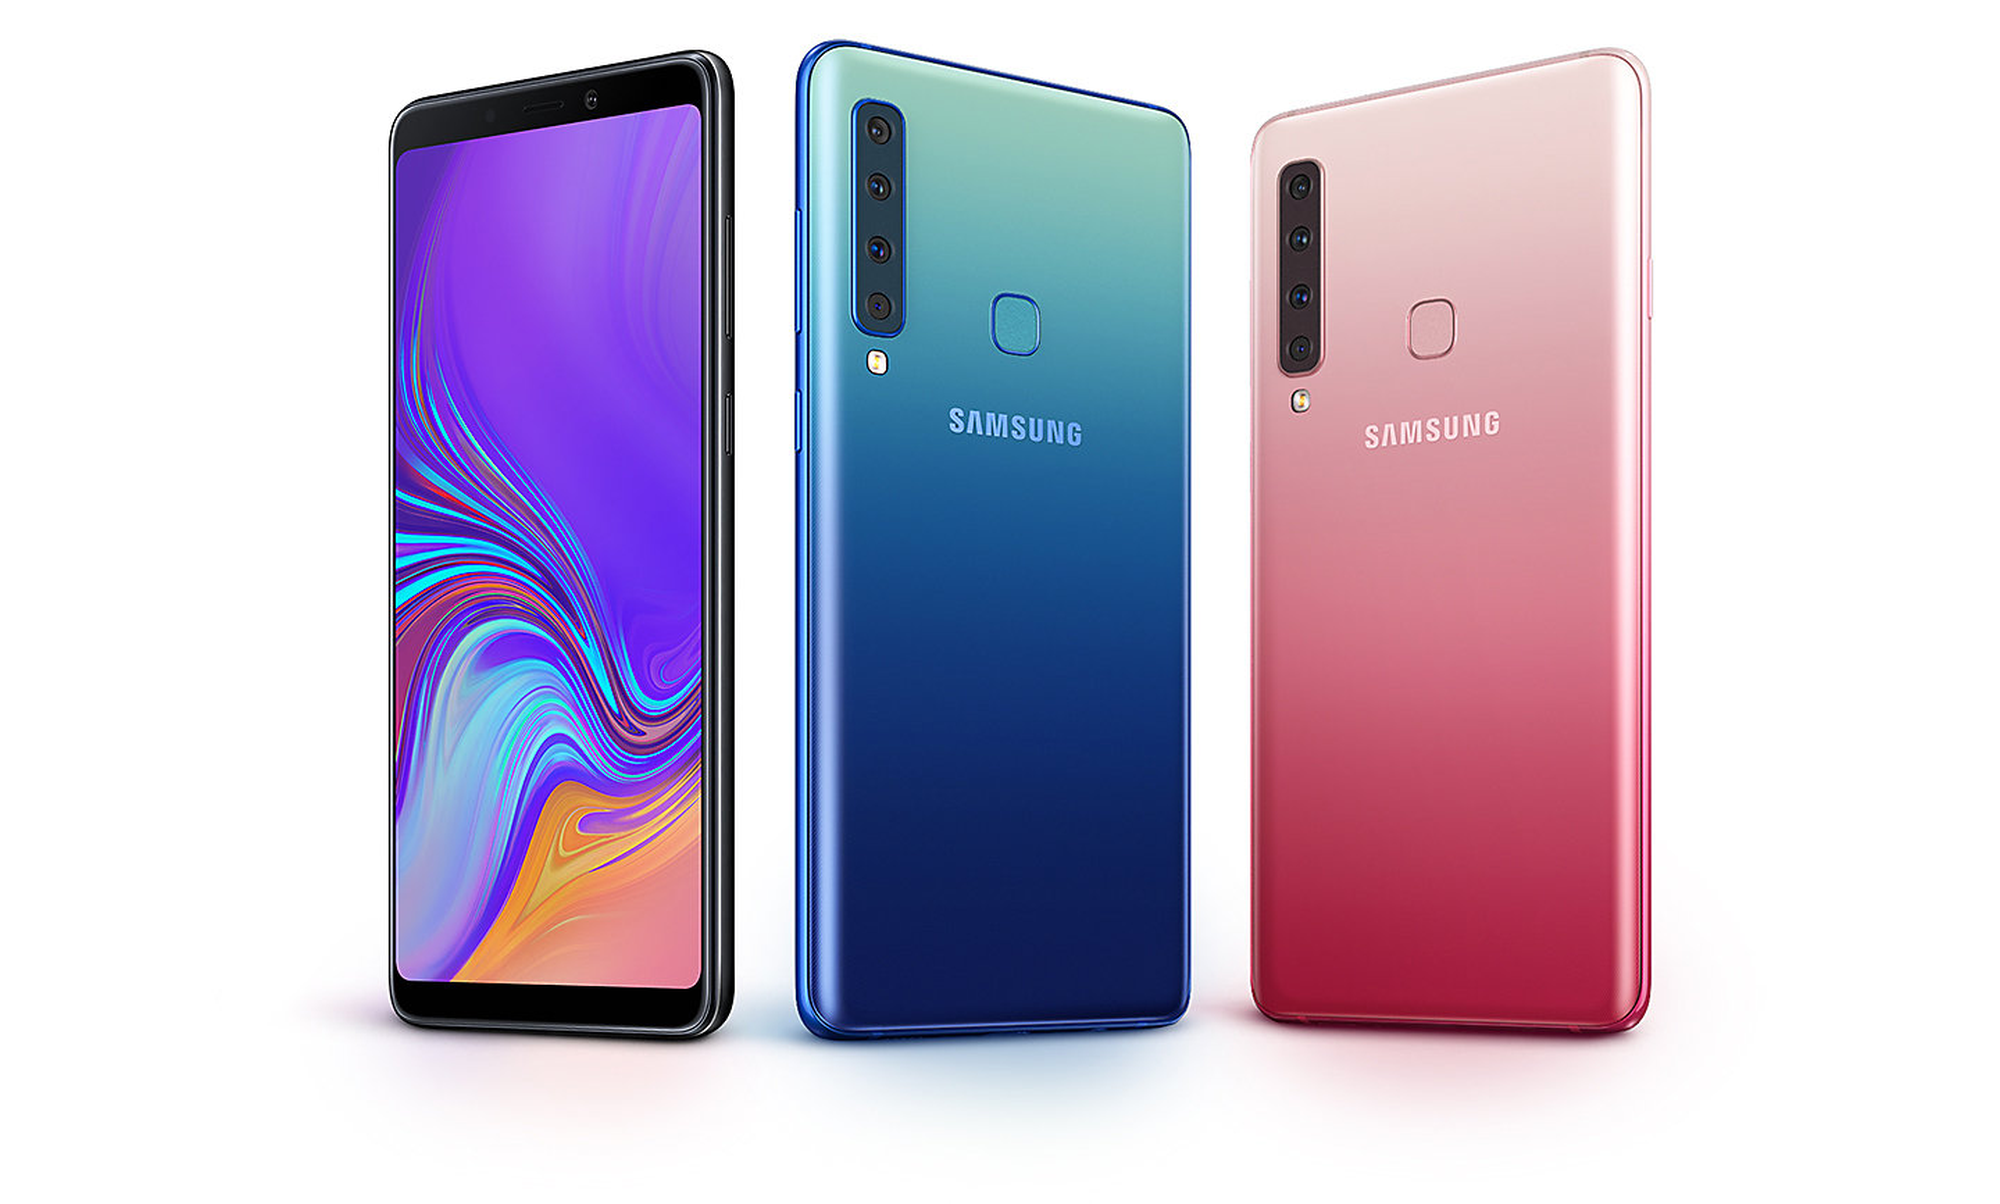 Samsung Galaxy A9 with four rear cameras colors